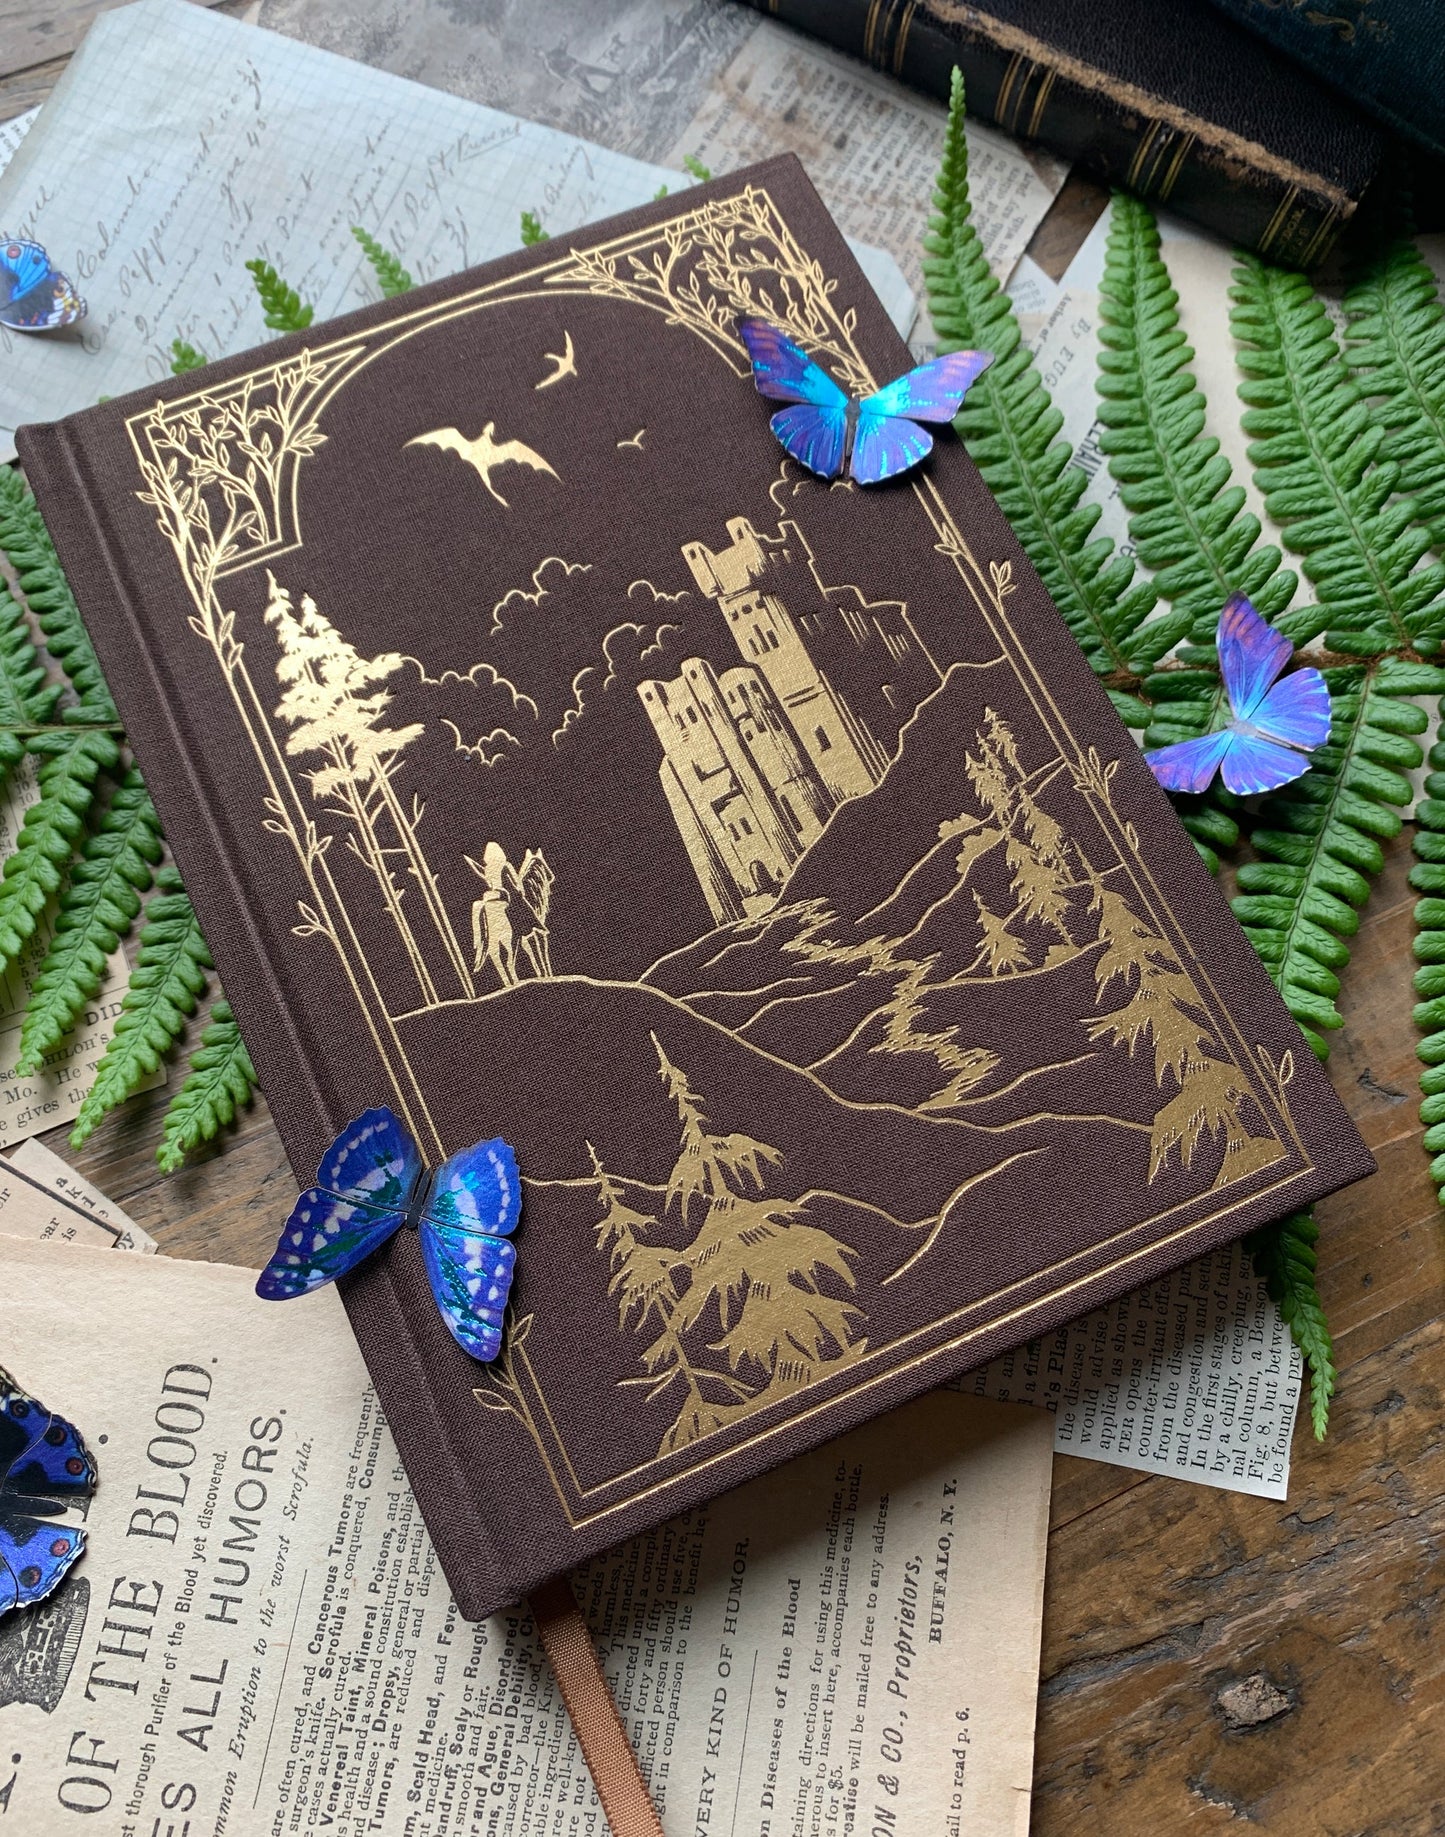 The Creeping Moon "The Wanderer" Notebook